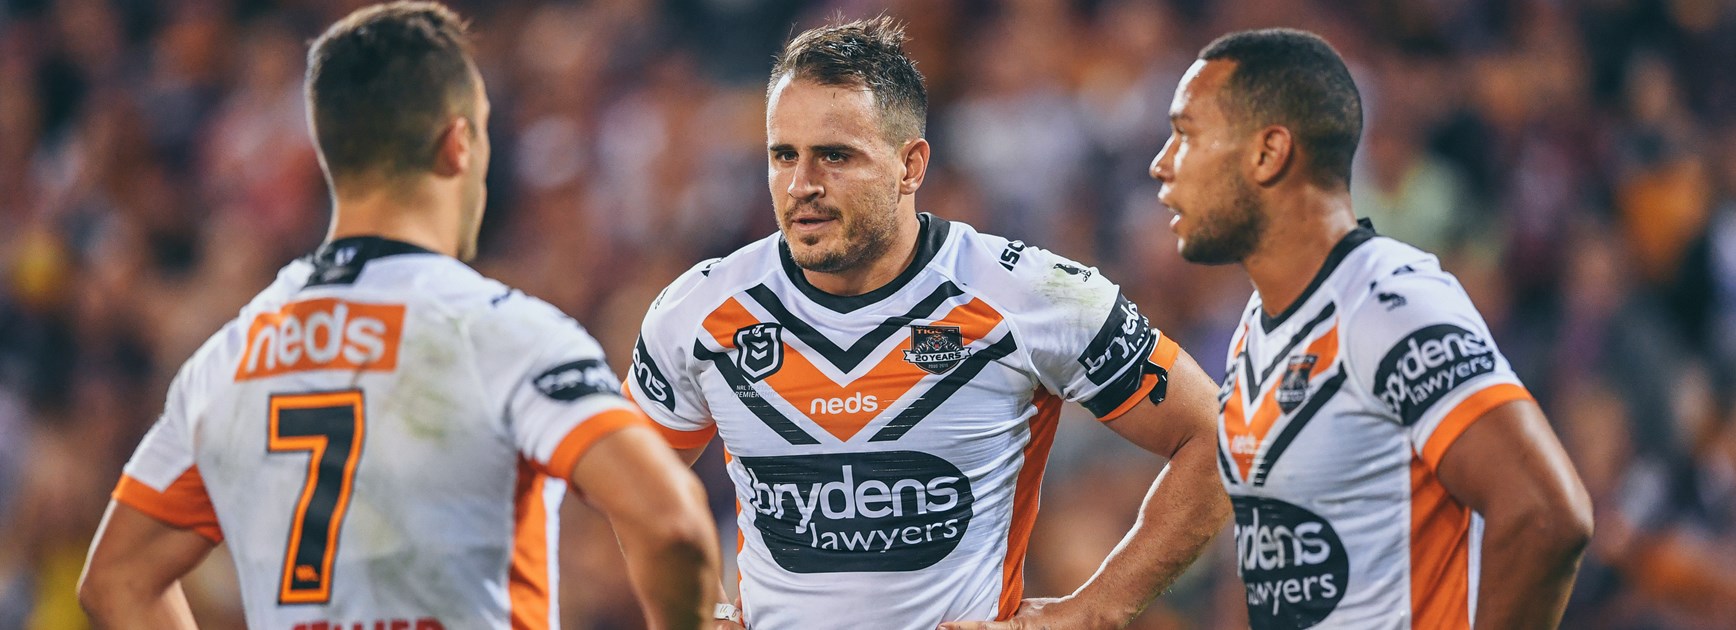 Maguire predicts Reynolds to bounce back, but Tigers future unclear